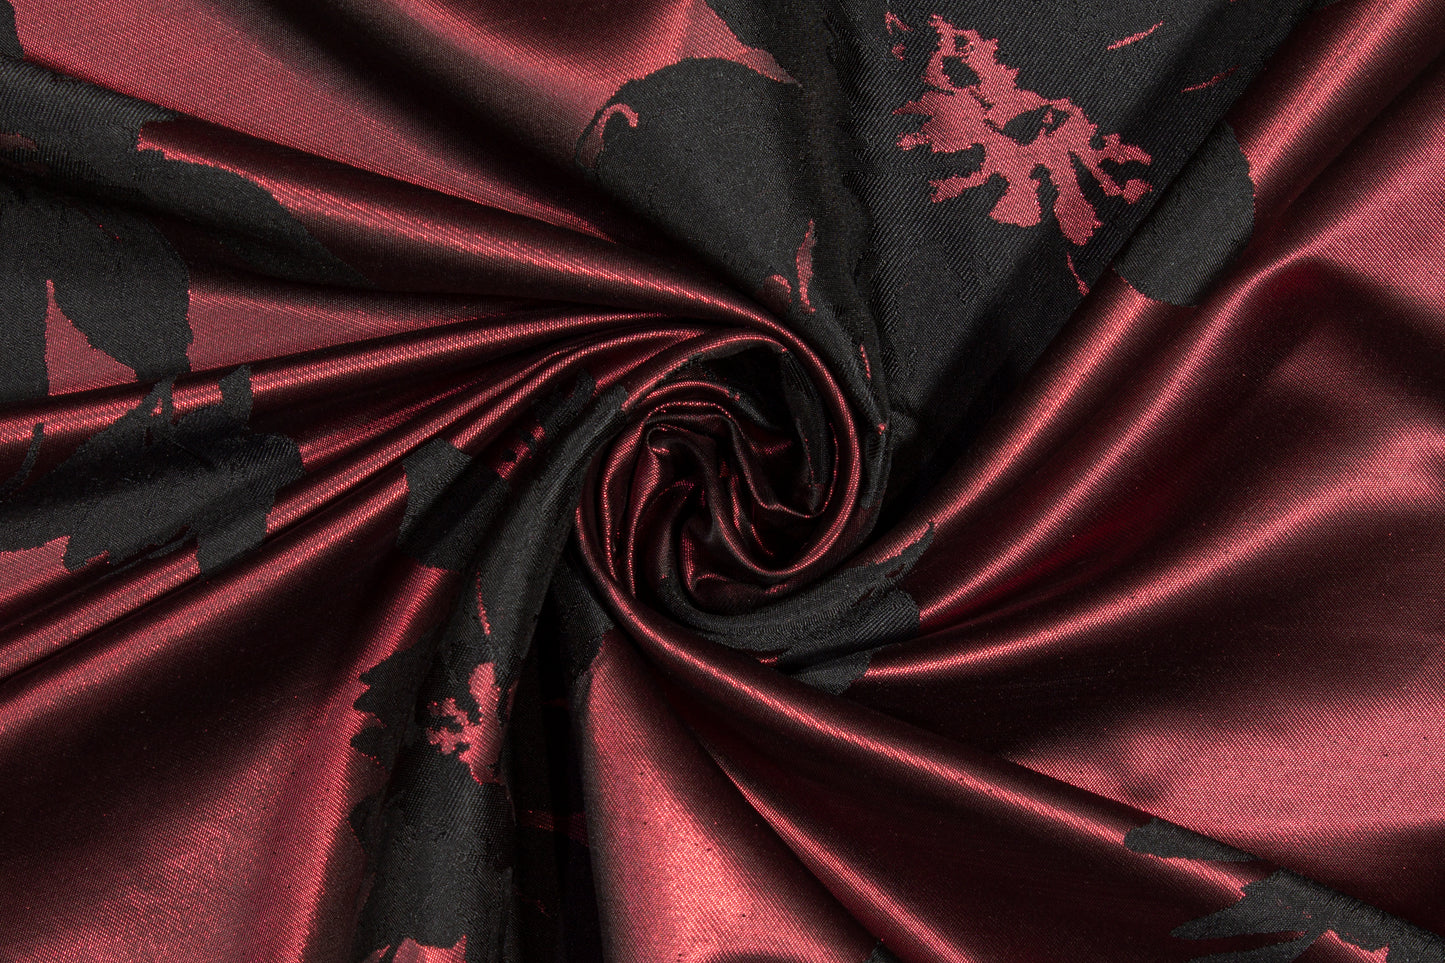 Metallic Floral Double-Faced Brocade - Burgundy and Black